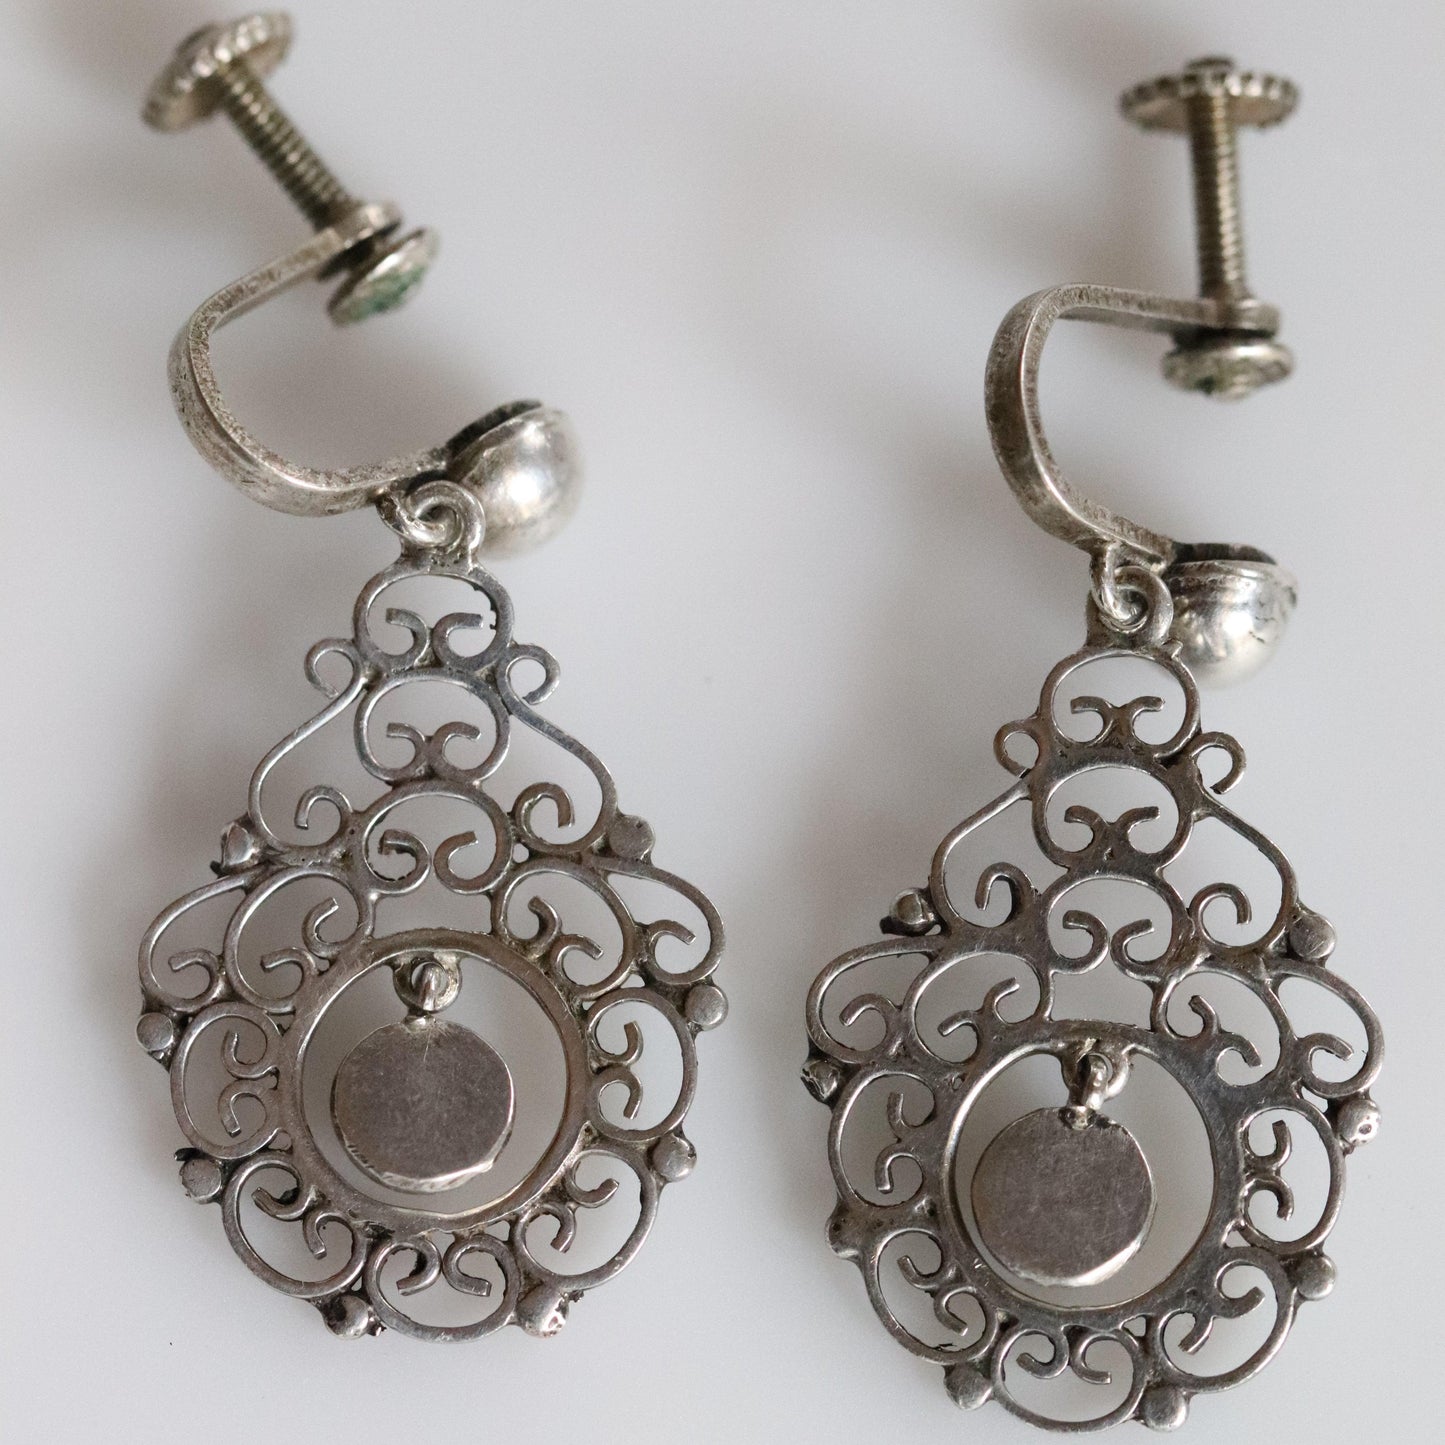 Vintage Modernist Silver Jewelry | Silver Ball and Lace Screwback Earrings - Carmel Fine Silver Jewelry